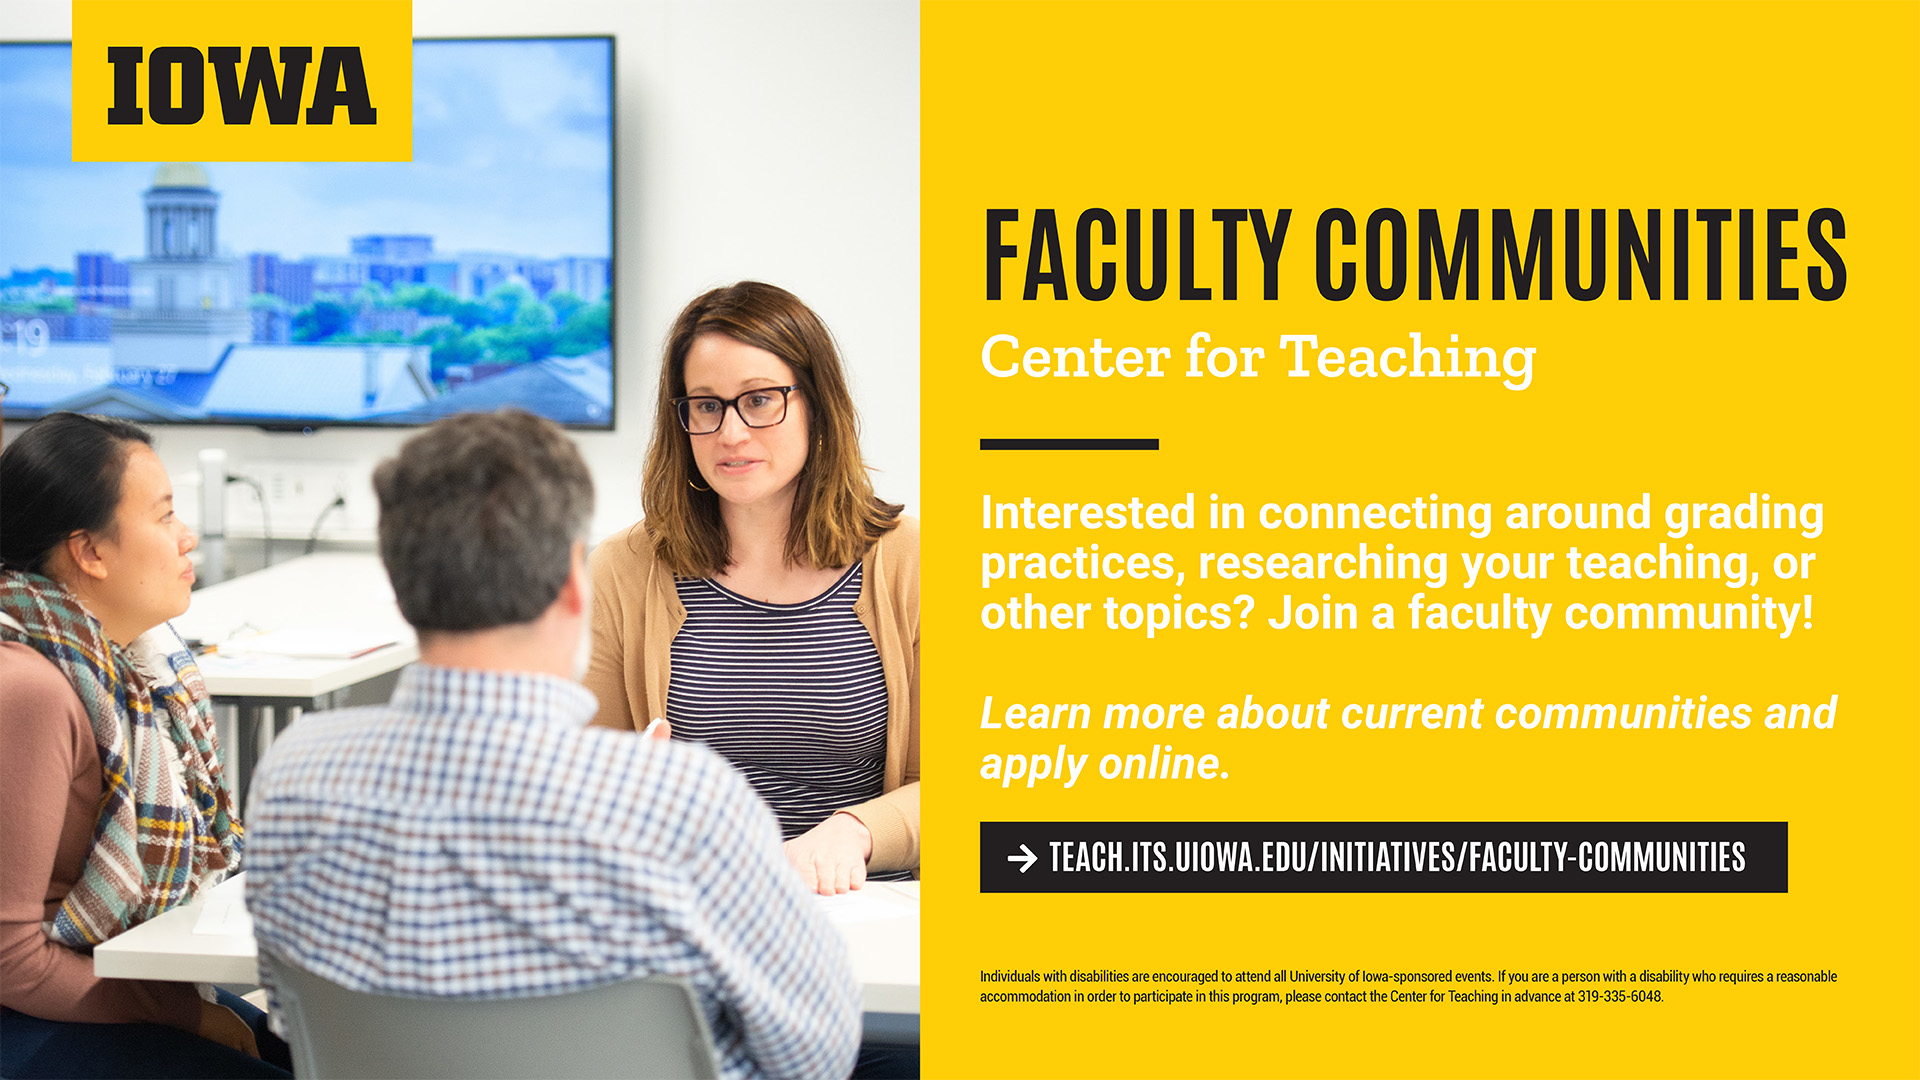 Visit the Center for Teaching's website to learn more about communities they offer.